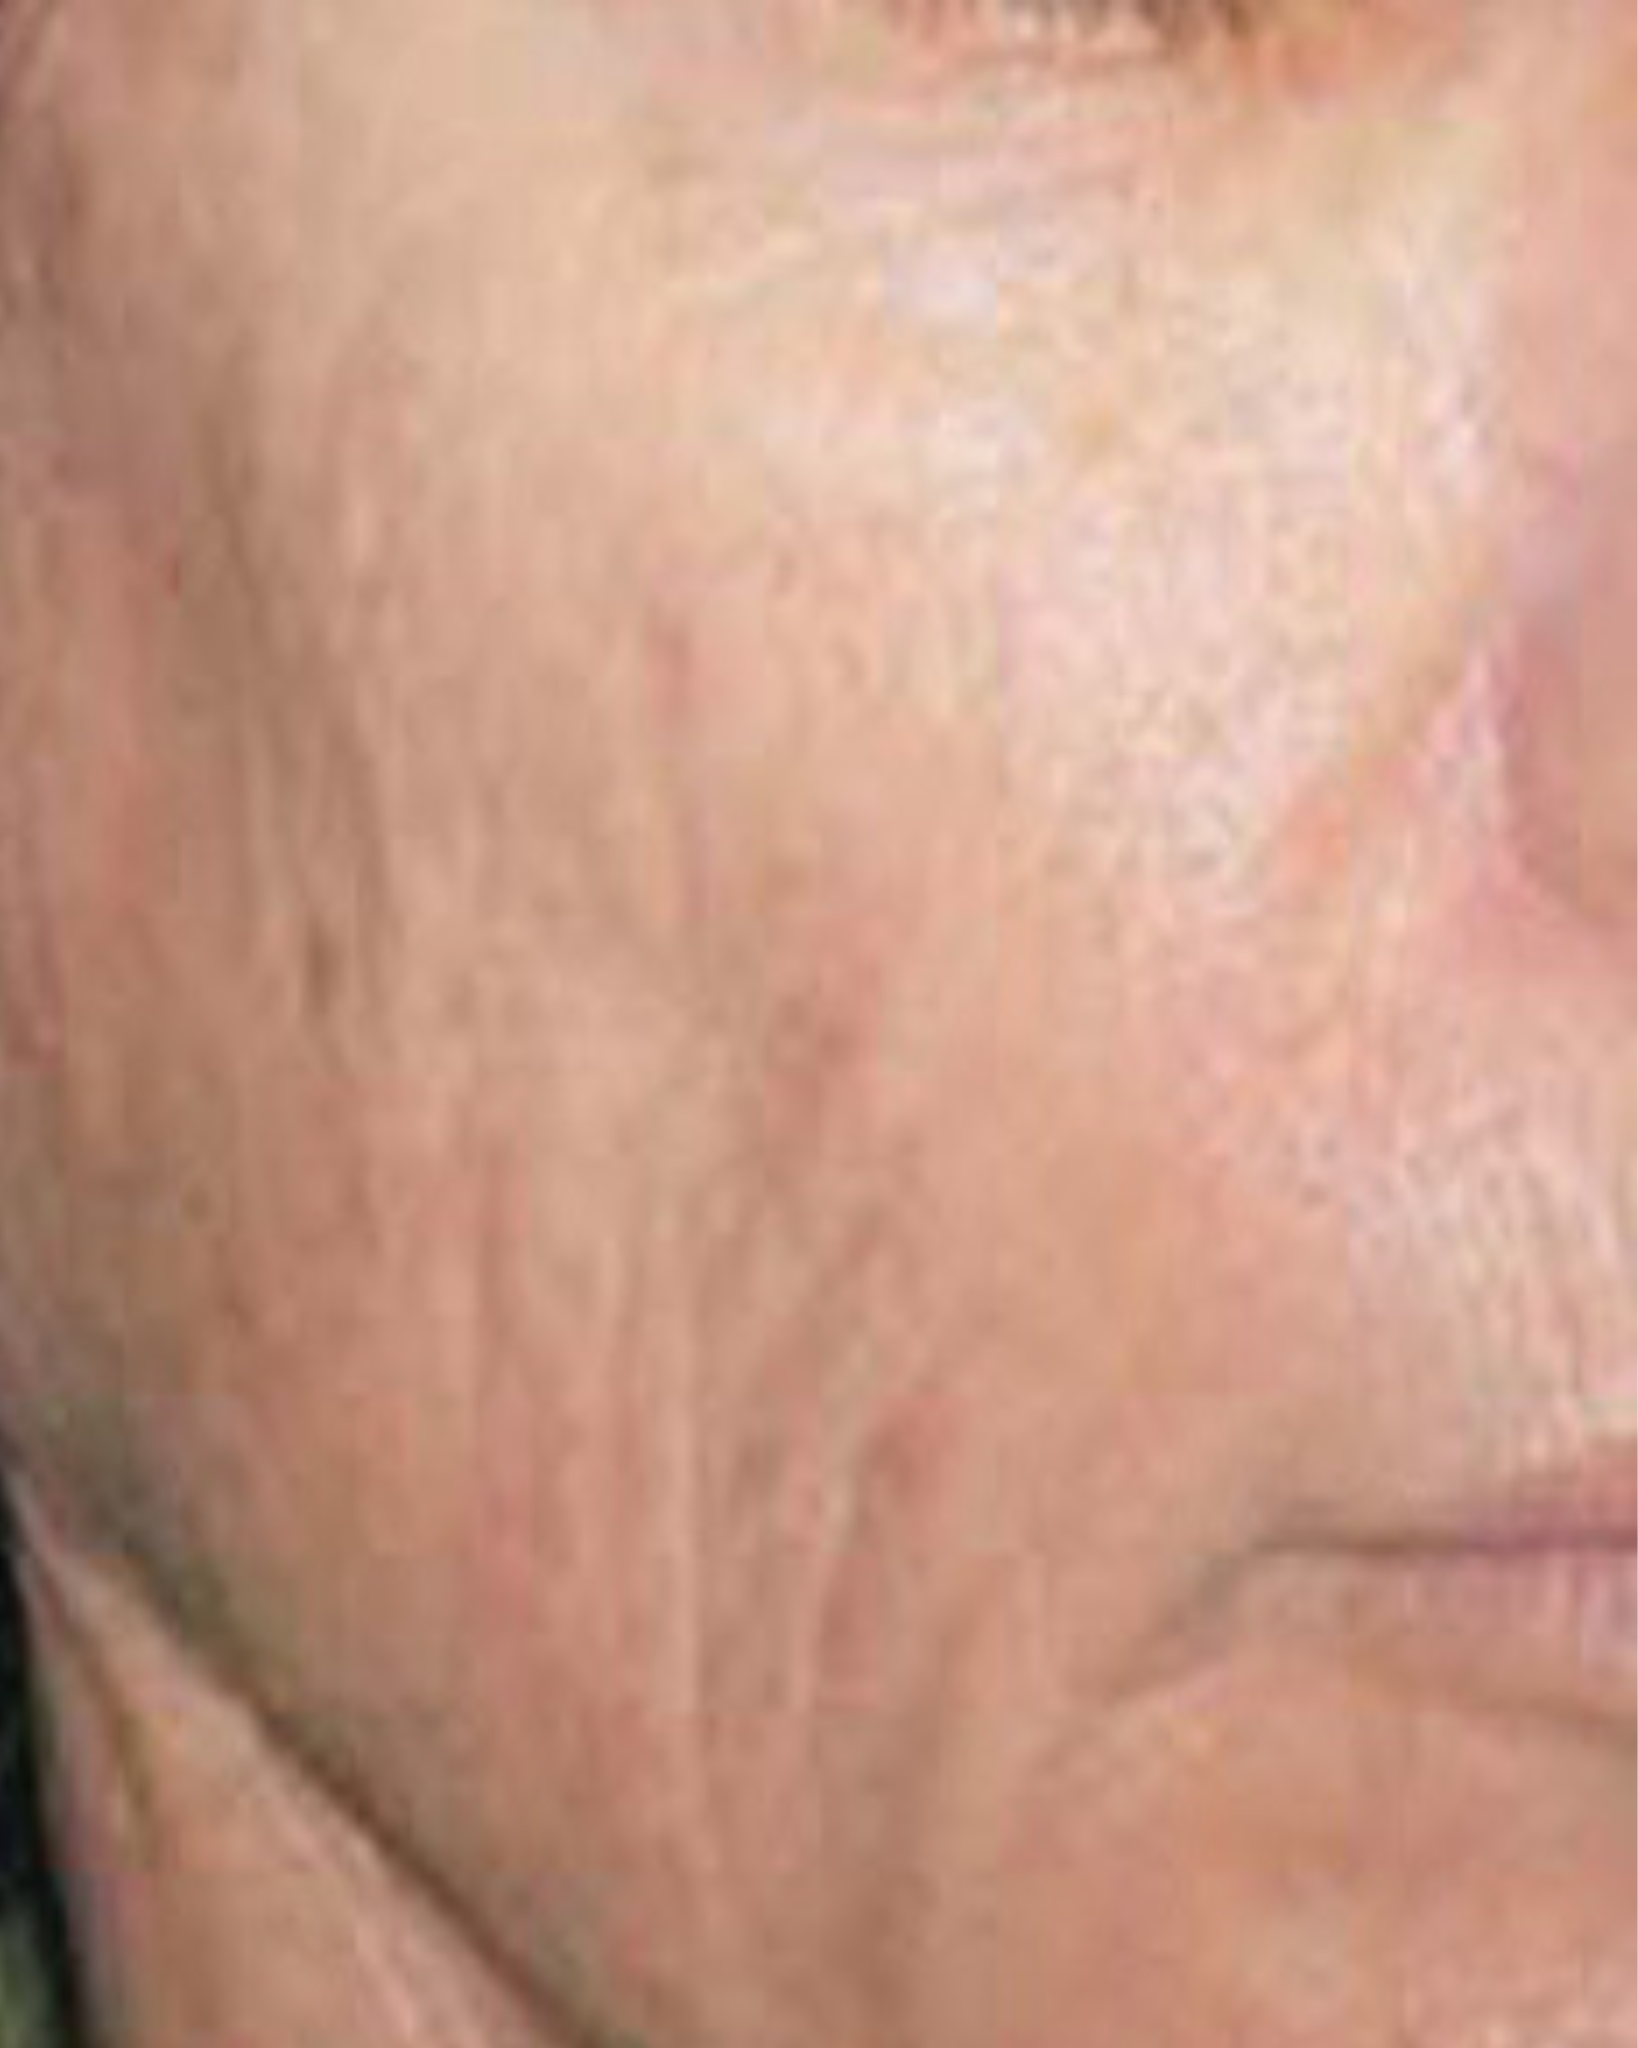 Laser Hair Removal Hair Line Clean Up (45)